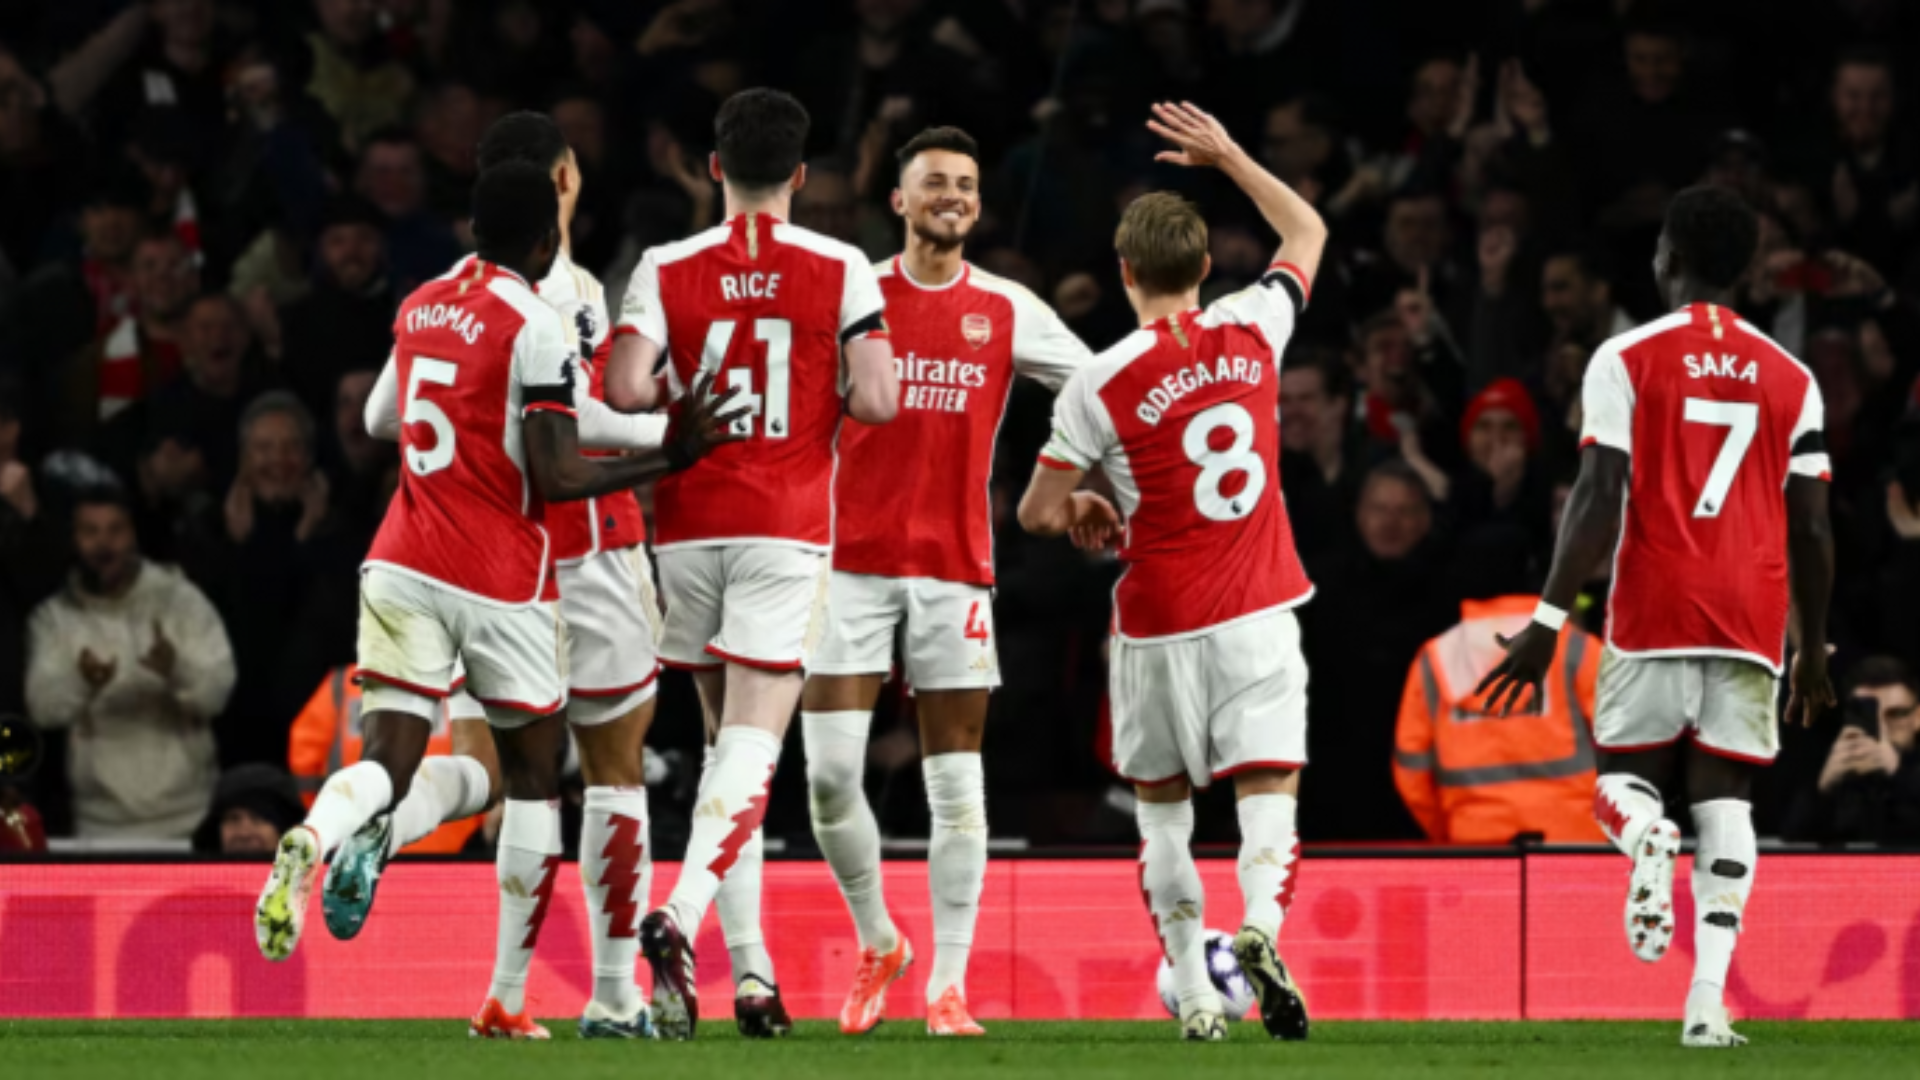 Arsenal’s 5-0 win elevates them to Premier League Summit